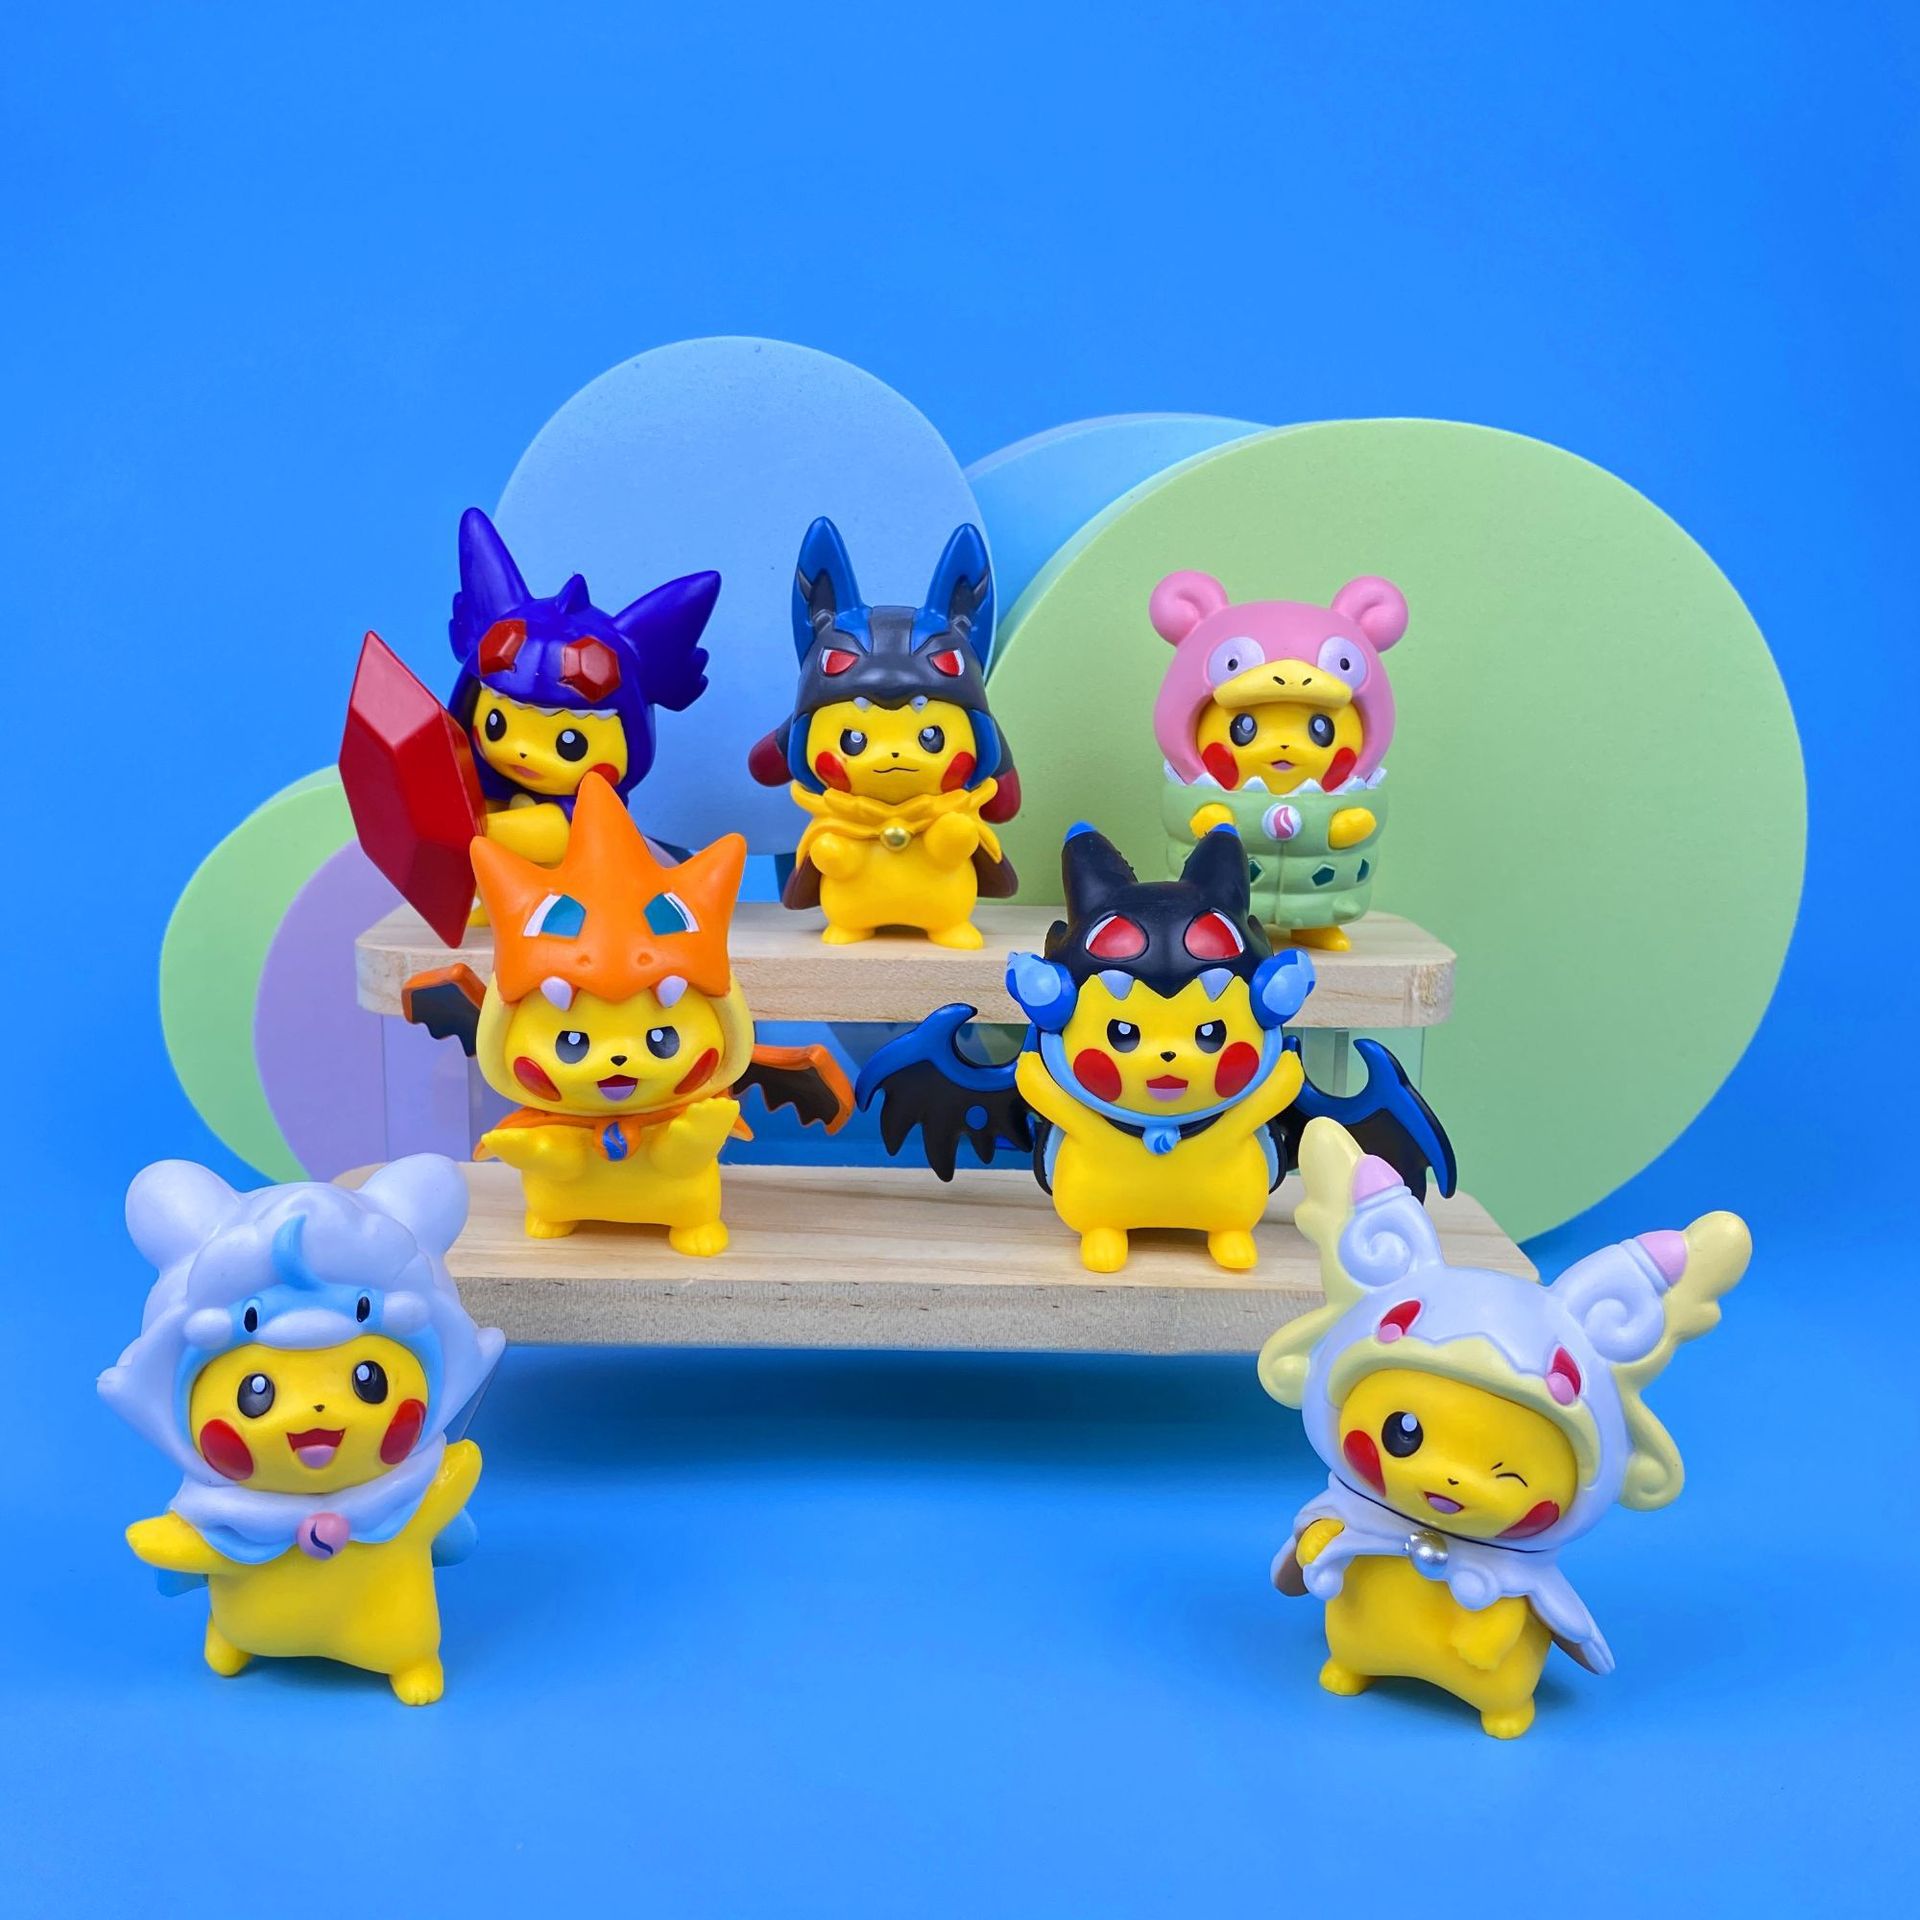 6 Pieces of Cross-Dressing Pikachu Doll Spot Goods Psyduck Pokémon Pokemon Hand-Made Gifts for Boys